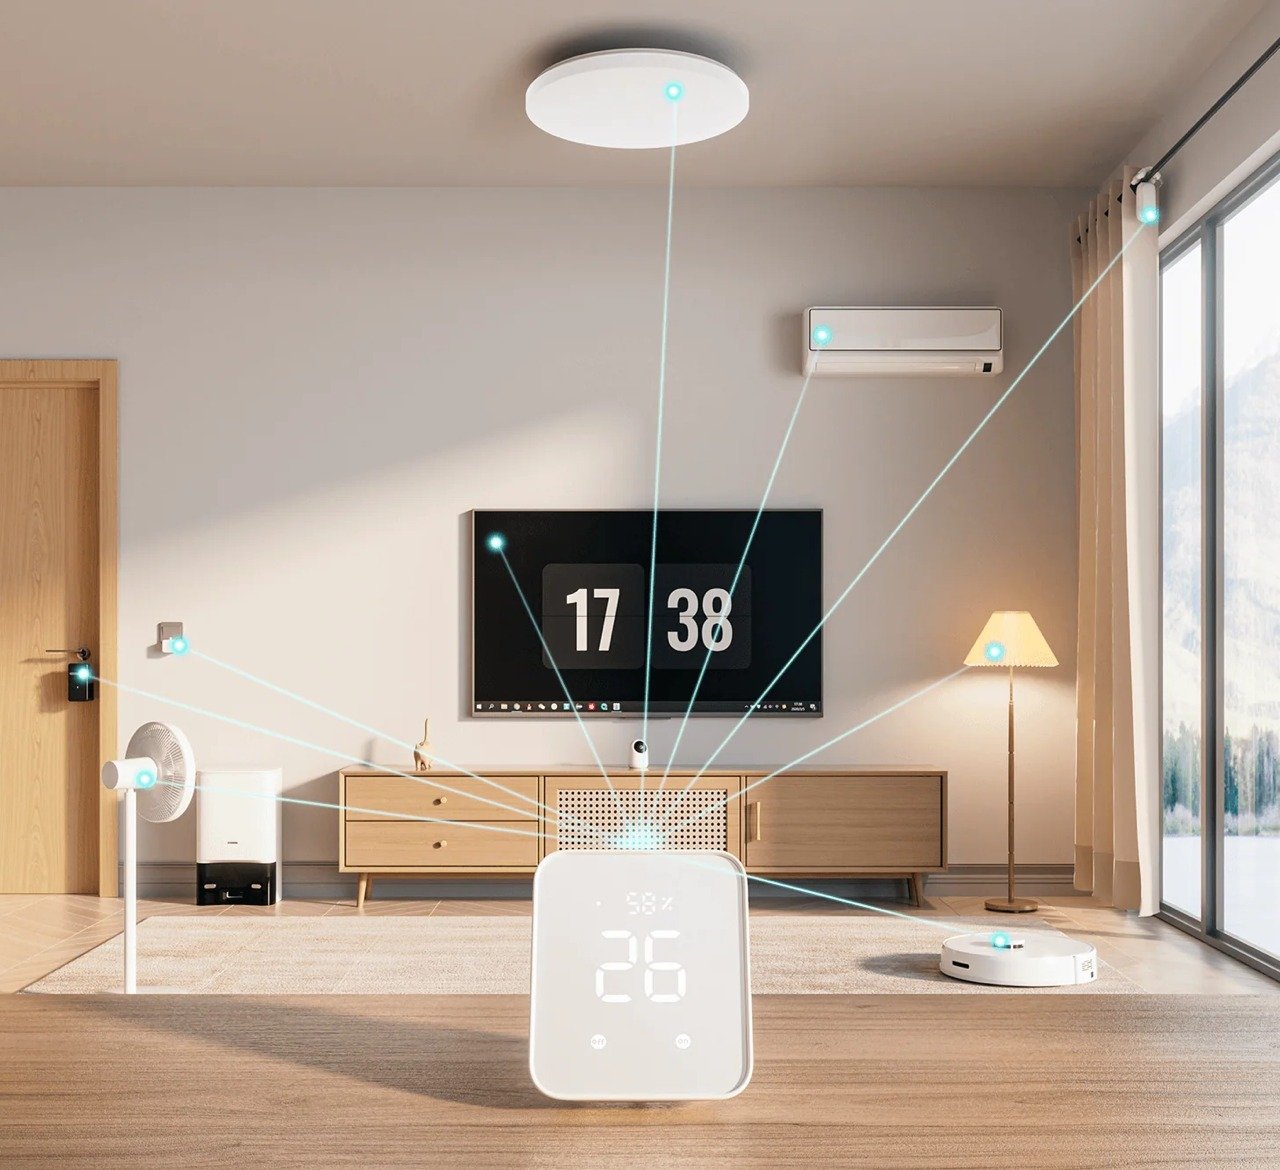 SwitchBot Hub 2 keeps your smart home working in harmony with